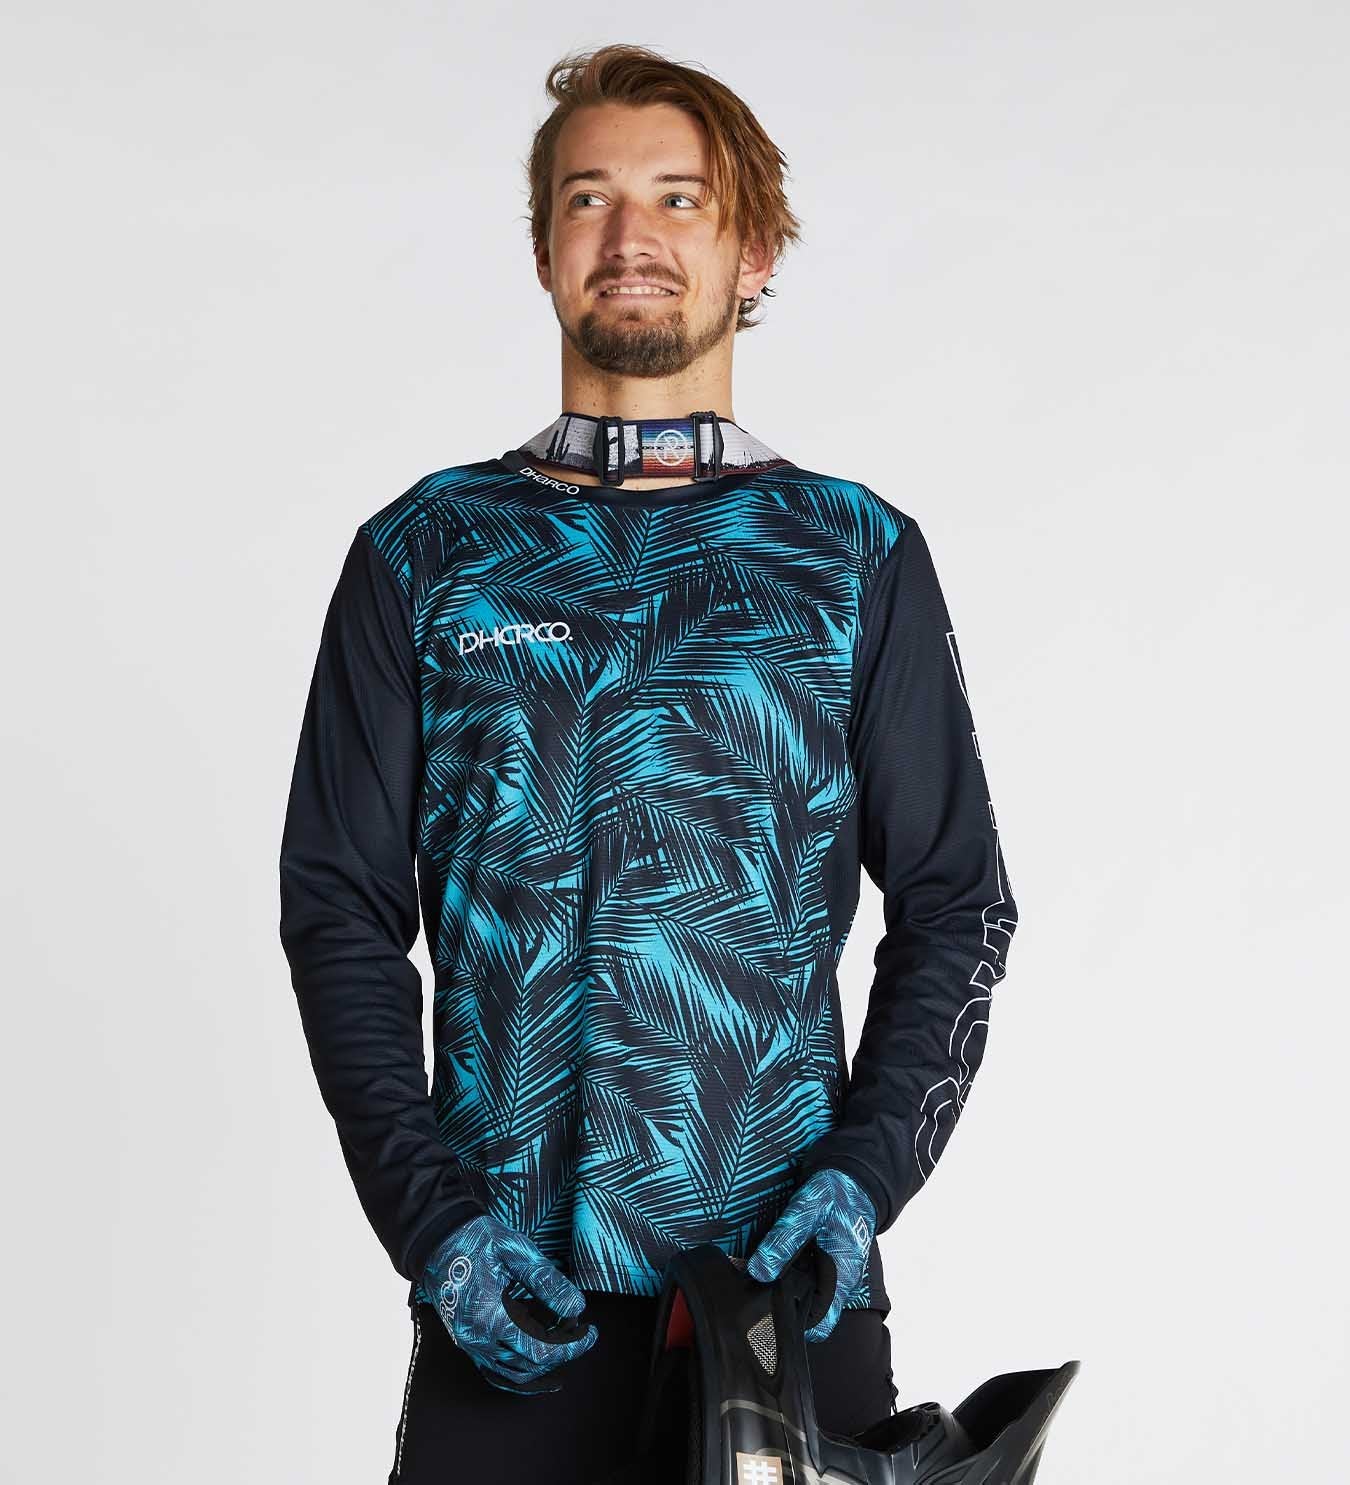 DHaRCO Mens Long Sleeve Gravity Jersey - Ice Palm